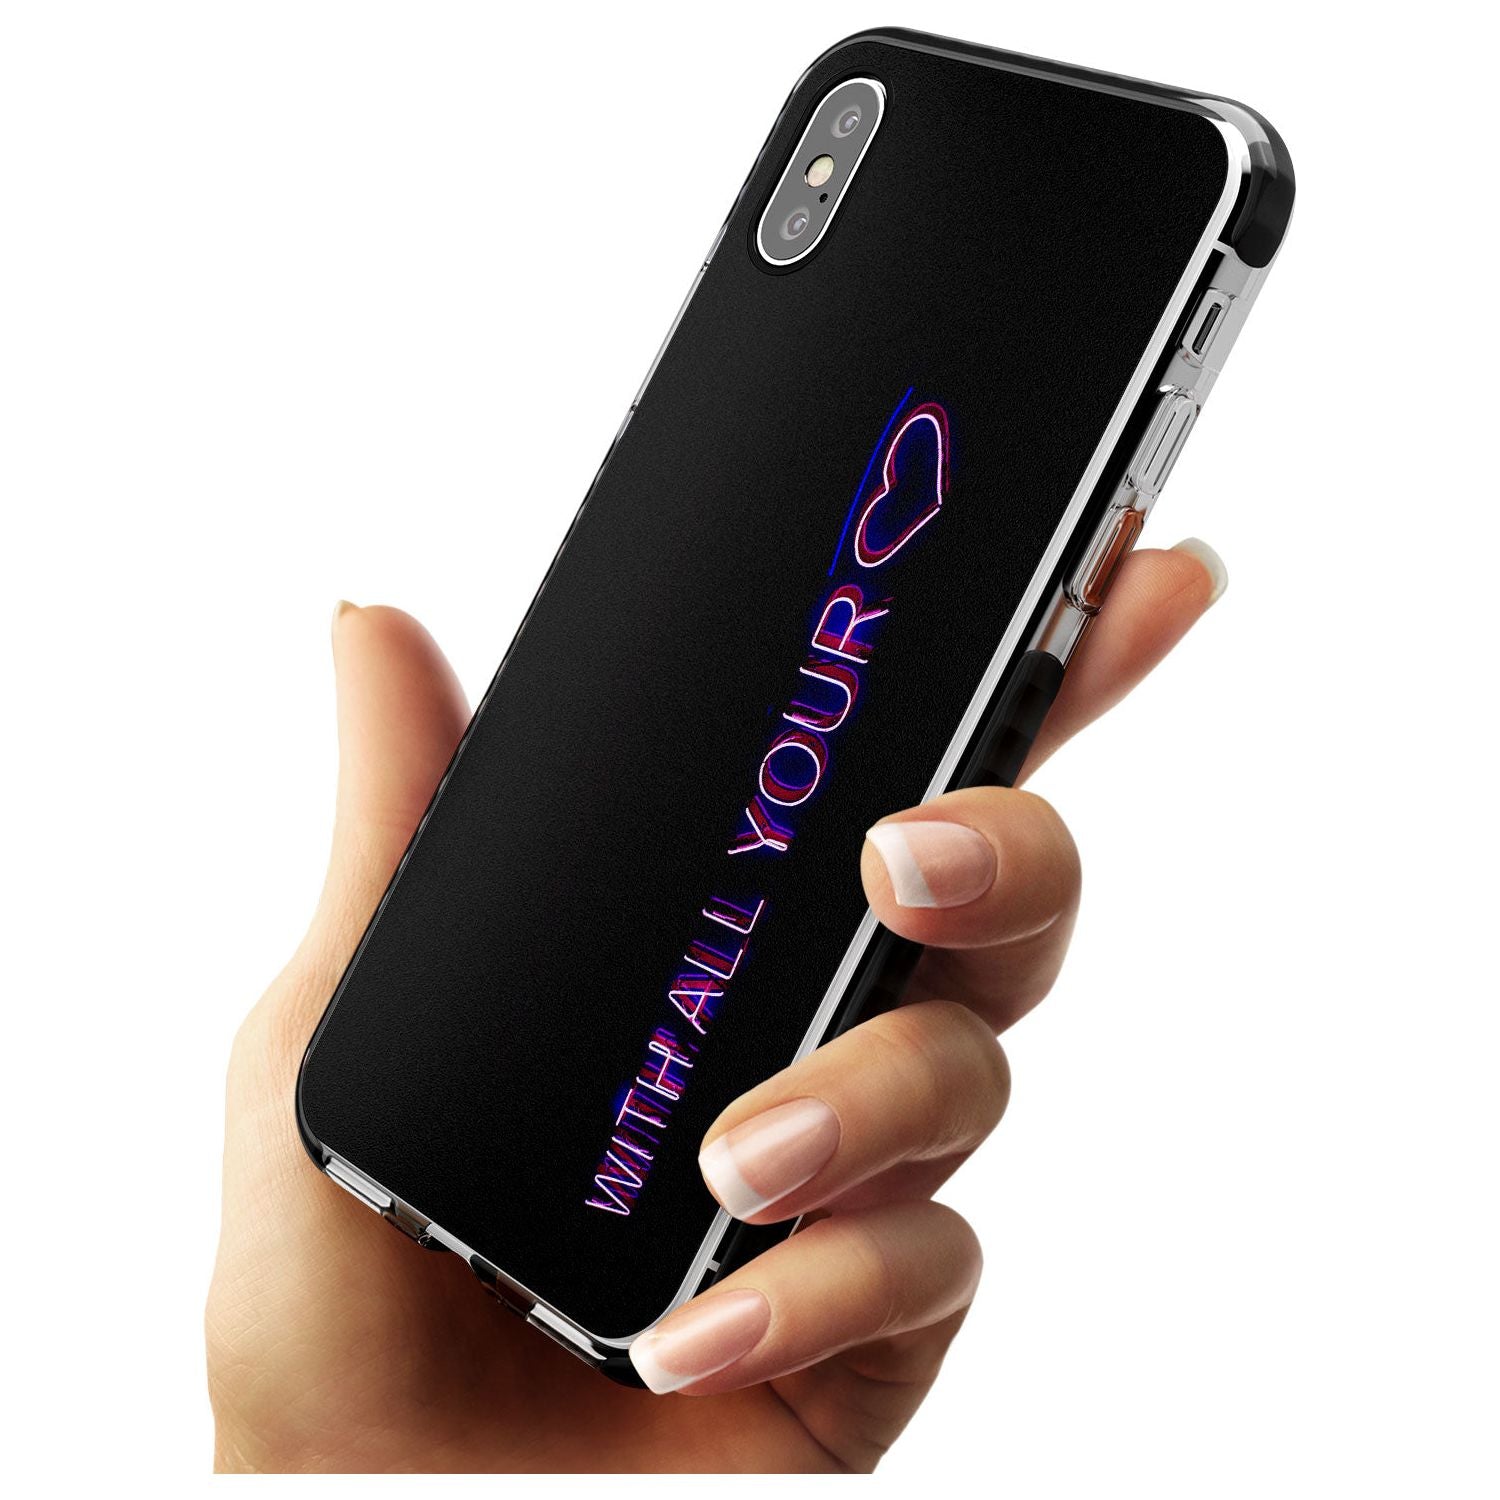 With All Your Heart Neon Sign Black Impact Phone Case for iPhone X XS Max XR